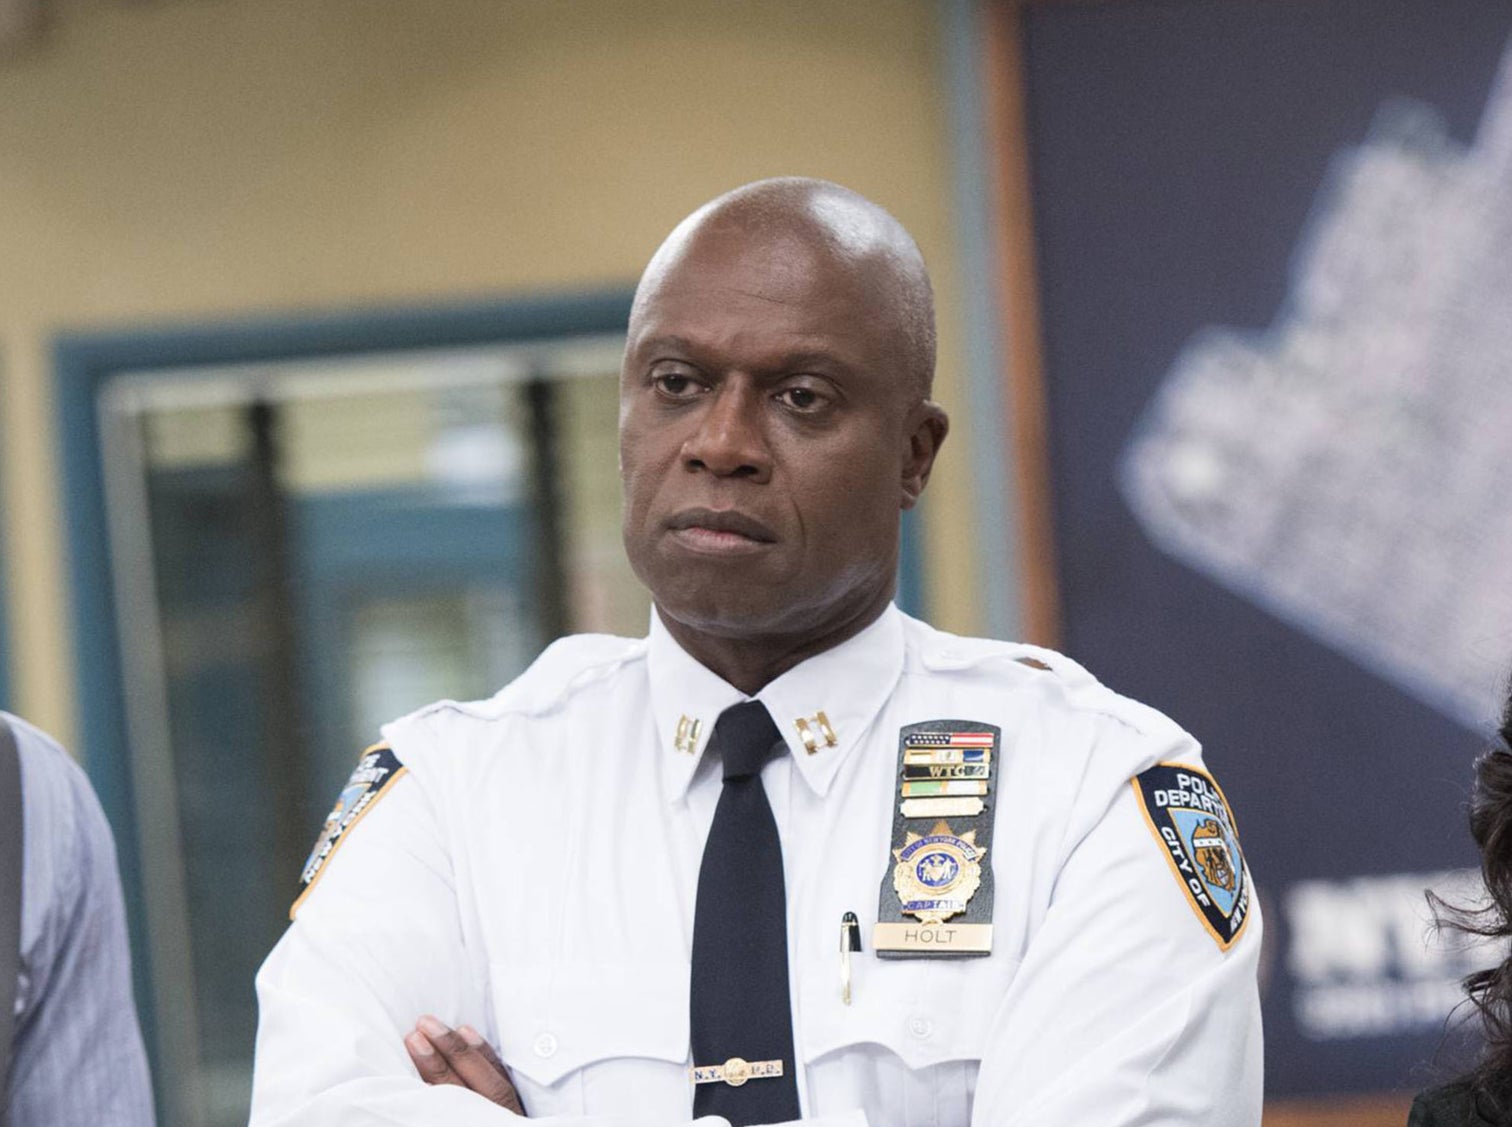 Captain Holt looking serious with his arms crossed